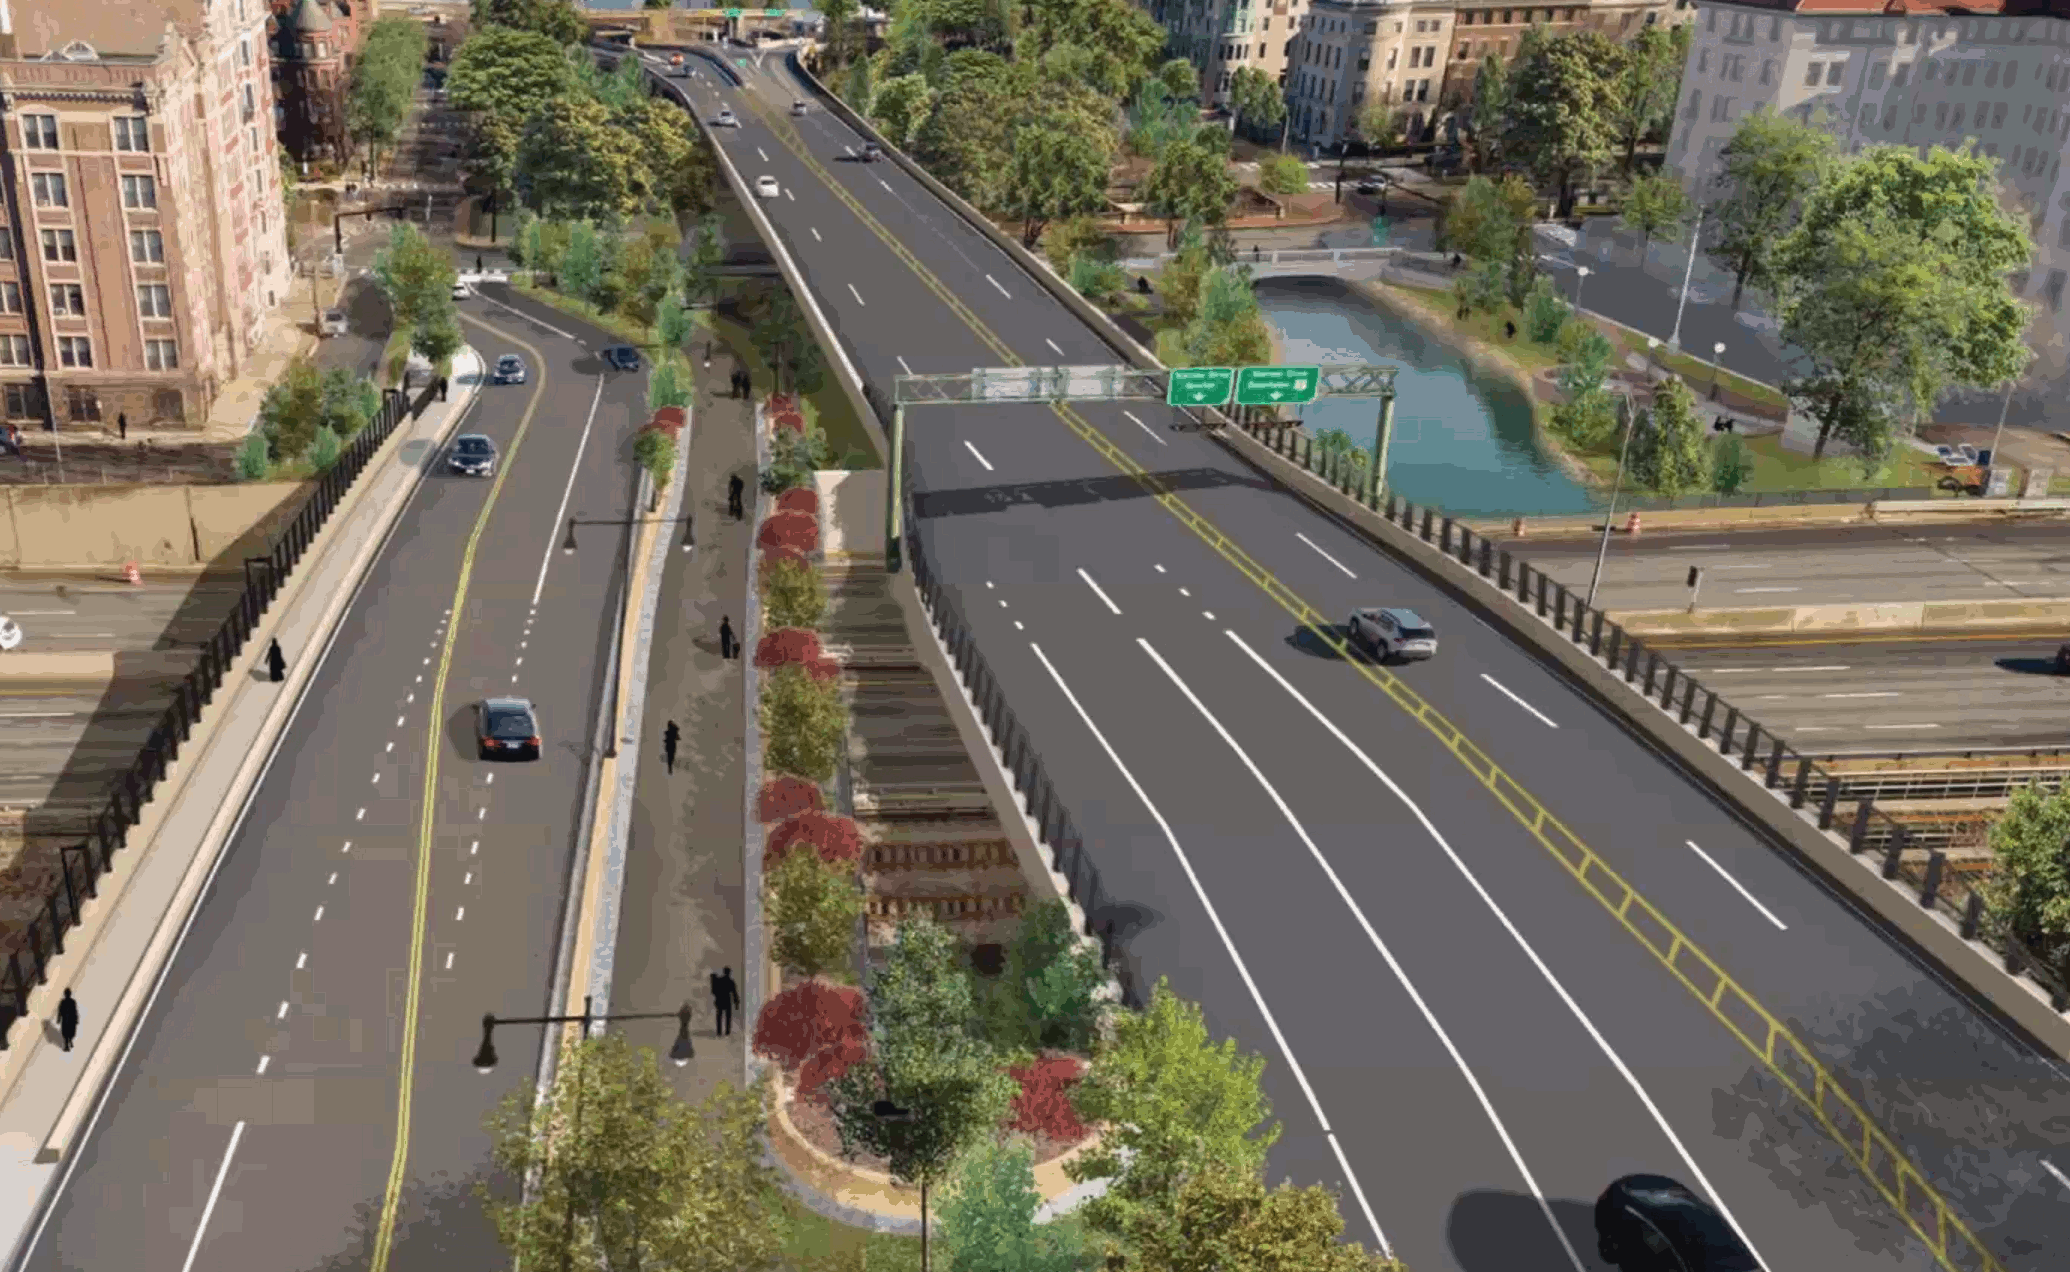 A two-frame animation shows the current-day view of the Bowker Overpass compared with a rendering illustration of the same view after a new highway project is complete. The current-day view shows a patched-up highway overpass extending over a railroad and multi-lane freeway that runs horizontally across the middle of the image. Beyond the highway, the overpass continues over city streets among the treetops in a park. In the rendering, a new overpass runs along the same course, but two on- and off-ramps connecting the overpass to the surface streets in the distance have been removed, and a second, parallel bridge carries three lanes of traffic and a wide bike and pedestrian path to the left.